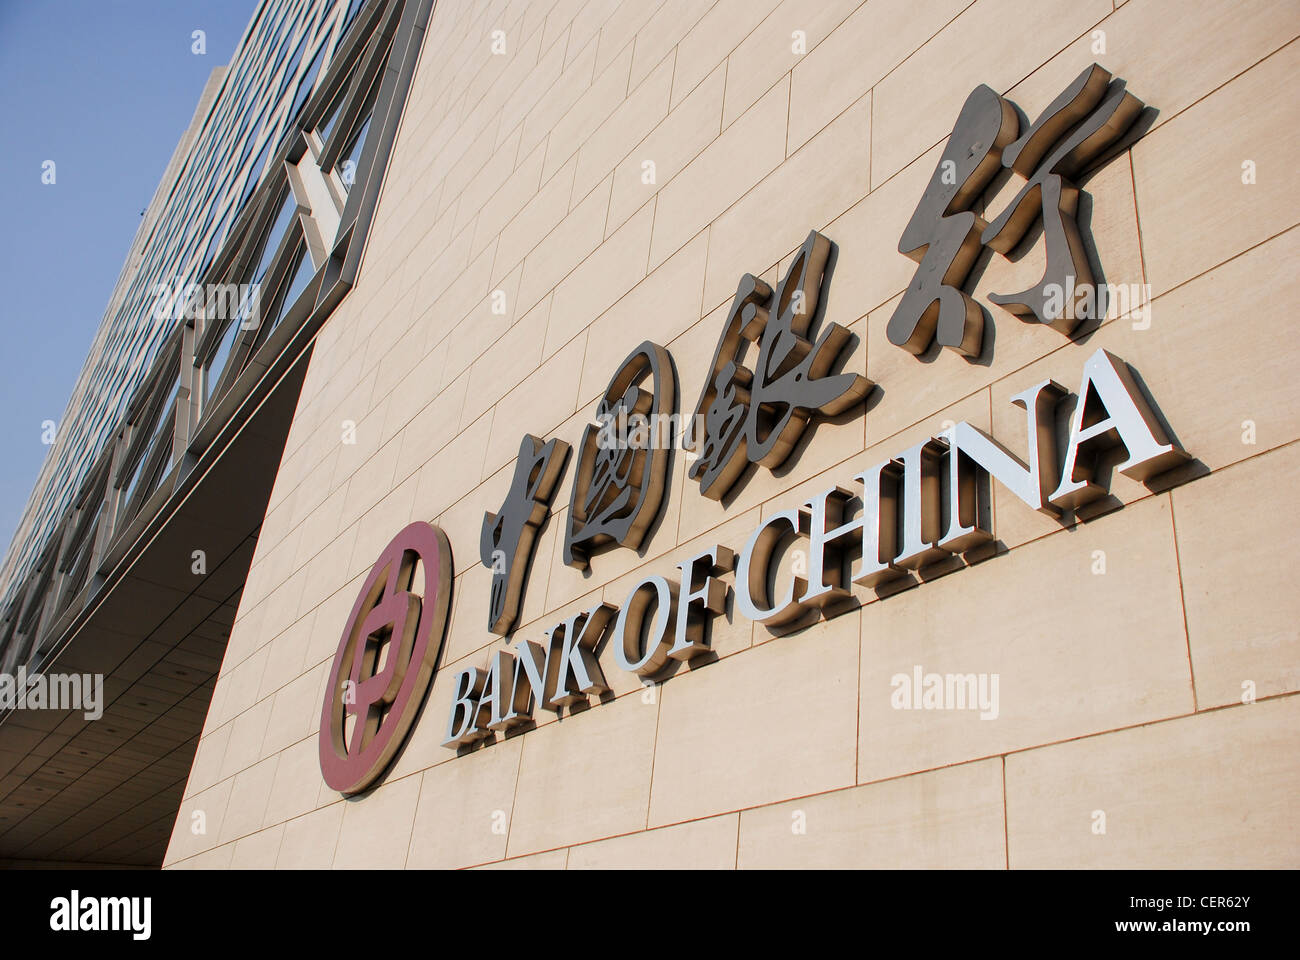 Bank Of China logo in its HQ Stock Photo